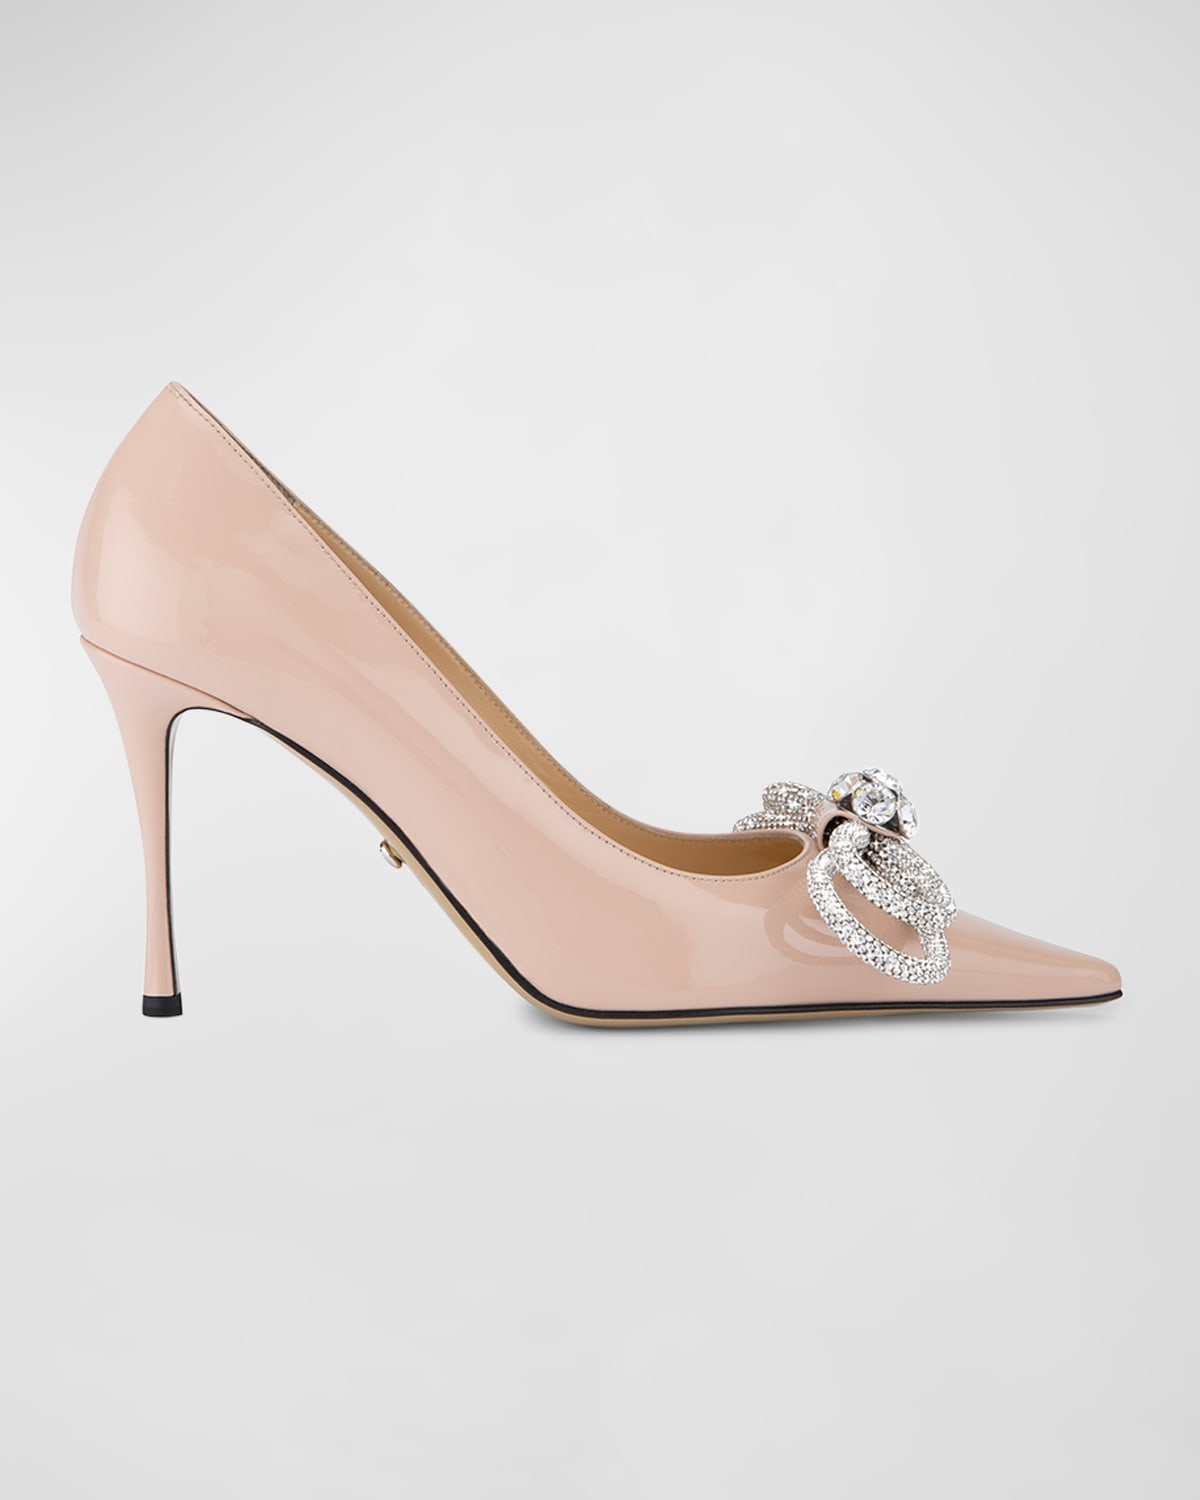 Mach & Mach Embellished Double Bow Patent Leather Pumps In Nude